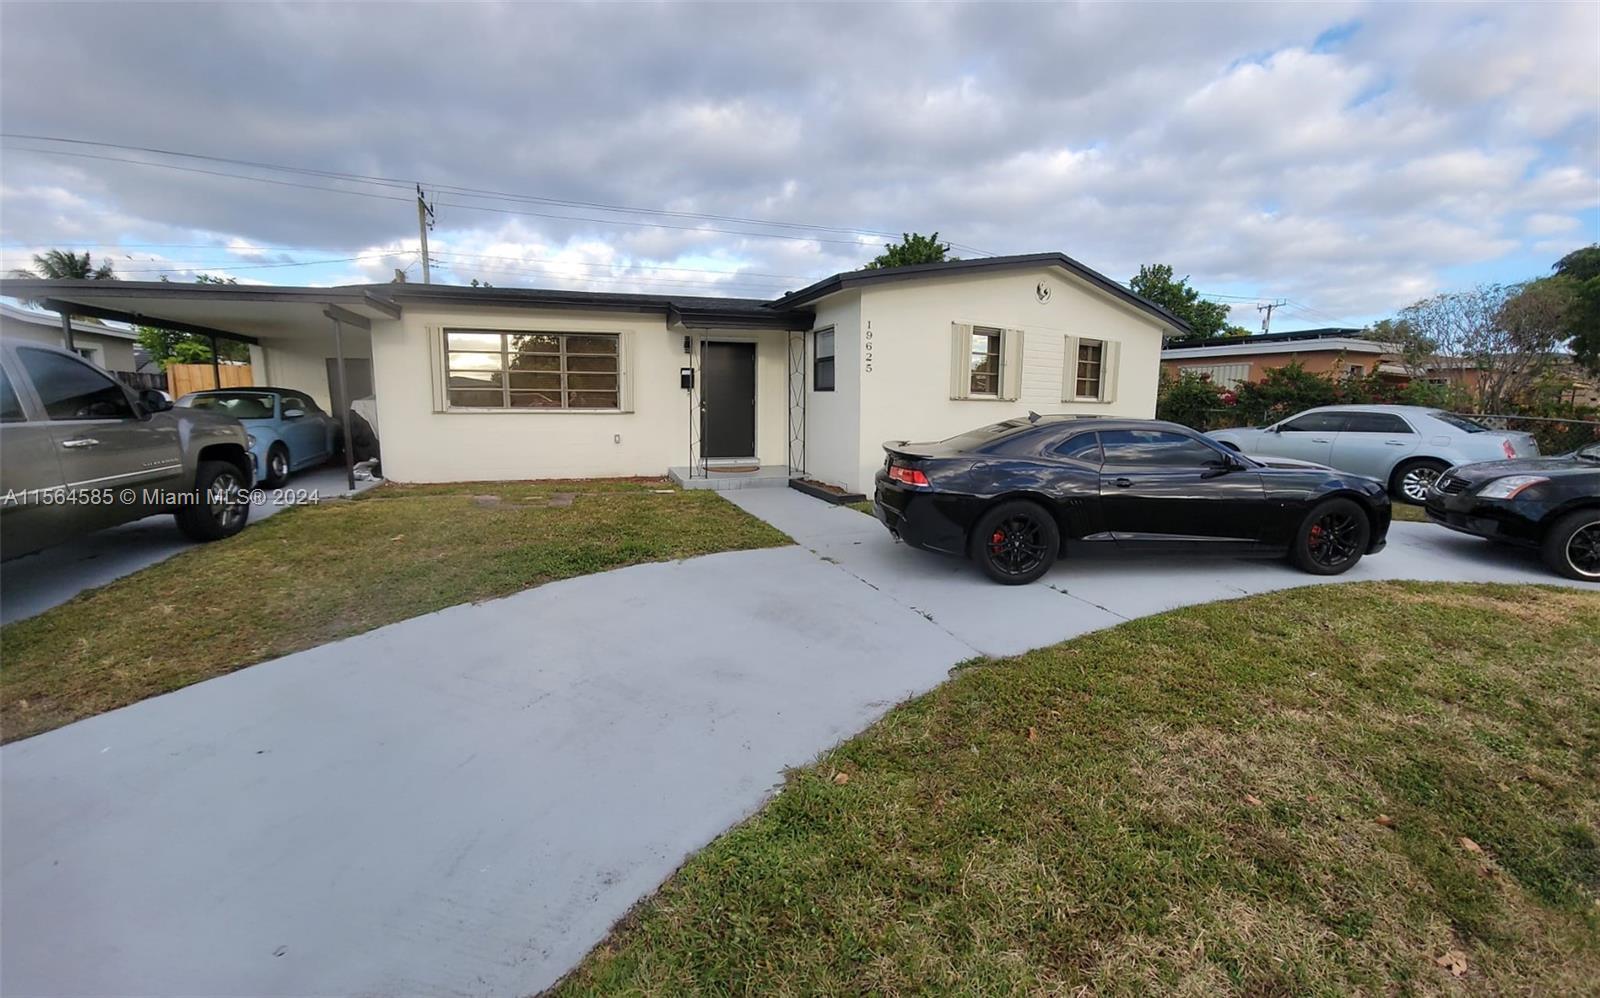 Photo of 19625 NW 5th Ave in Miami Gardens, FL